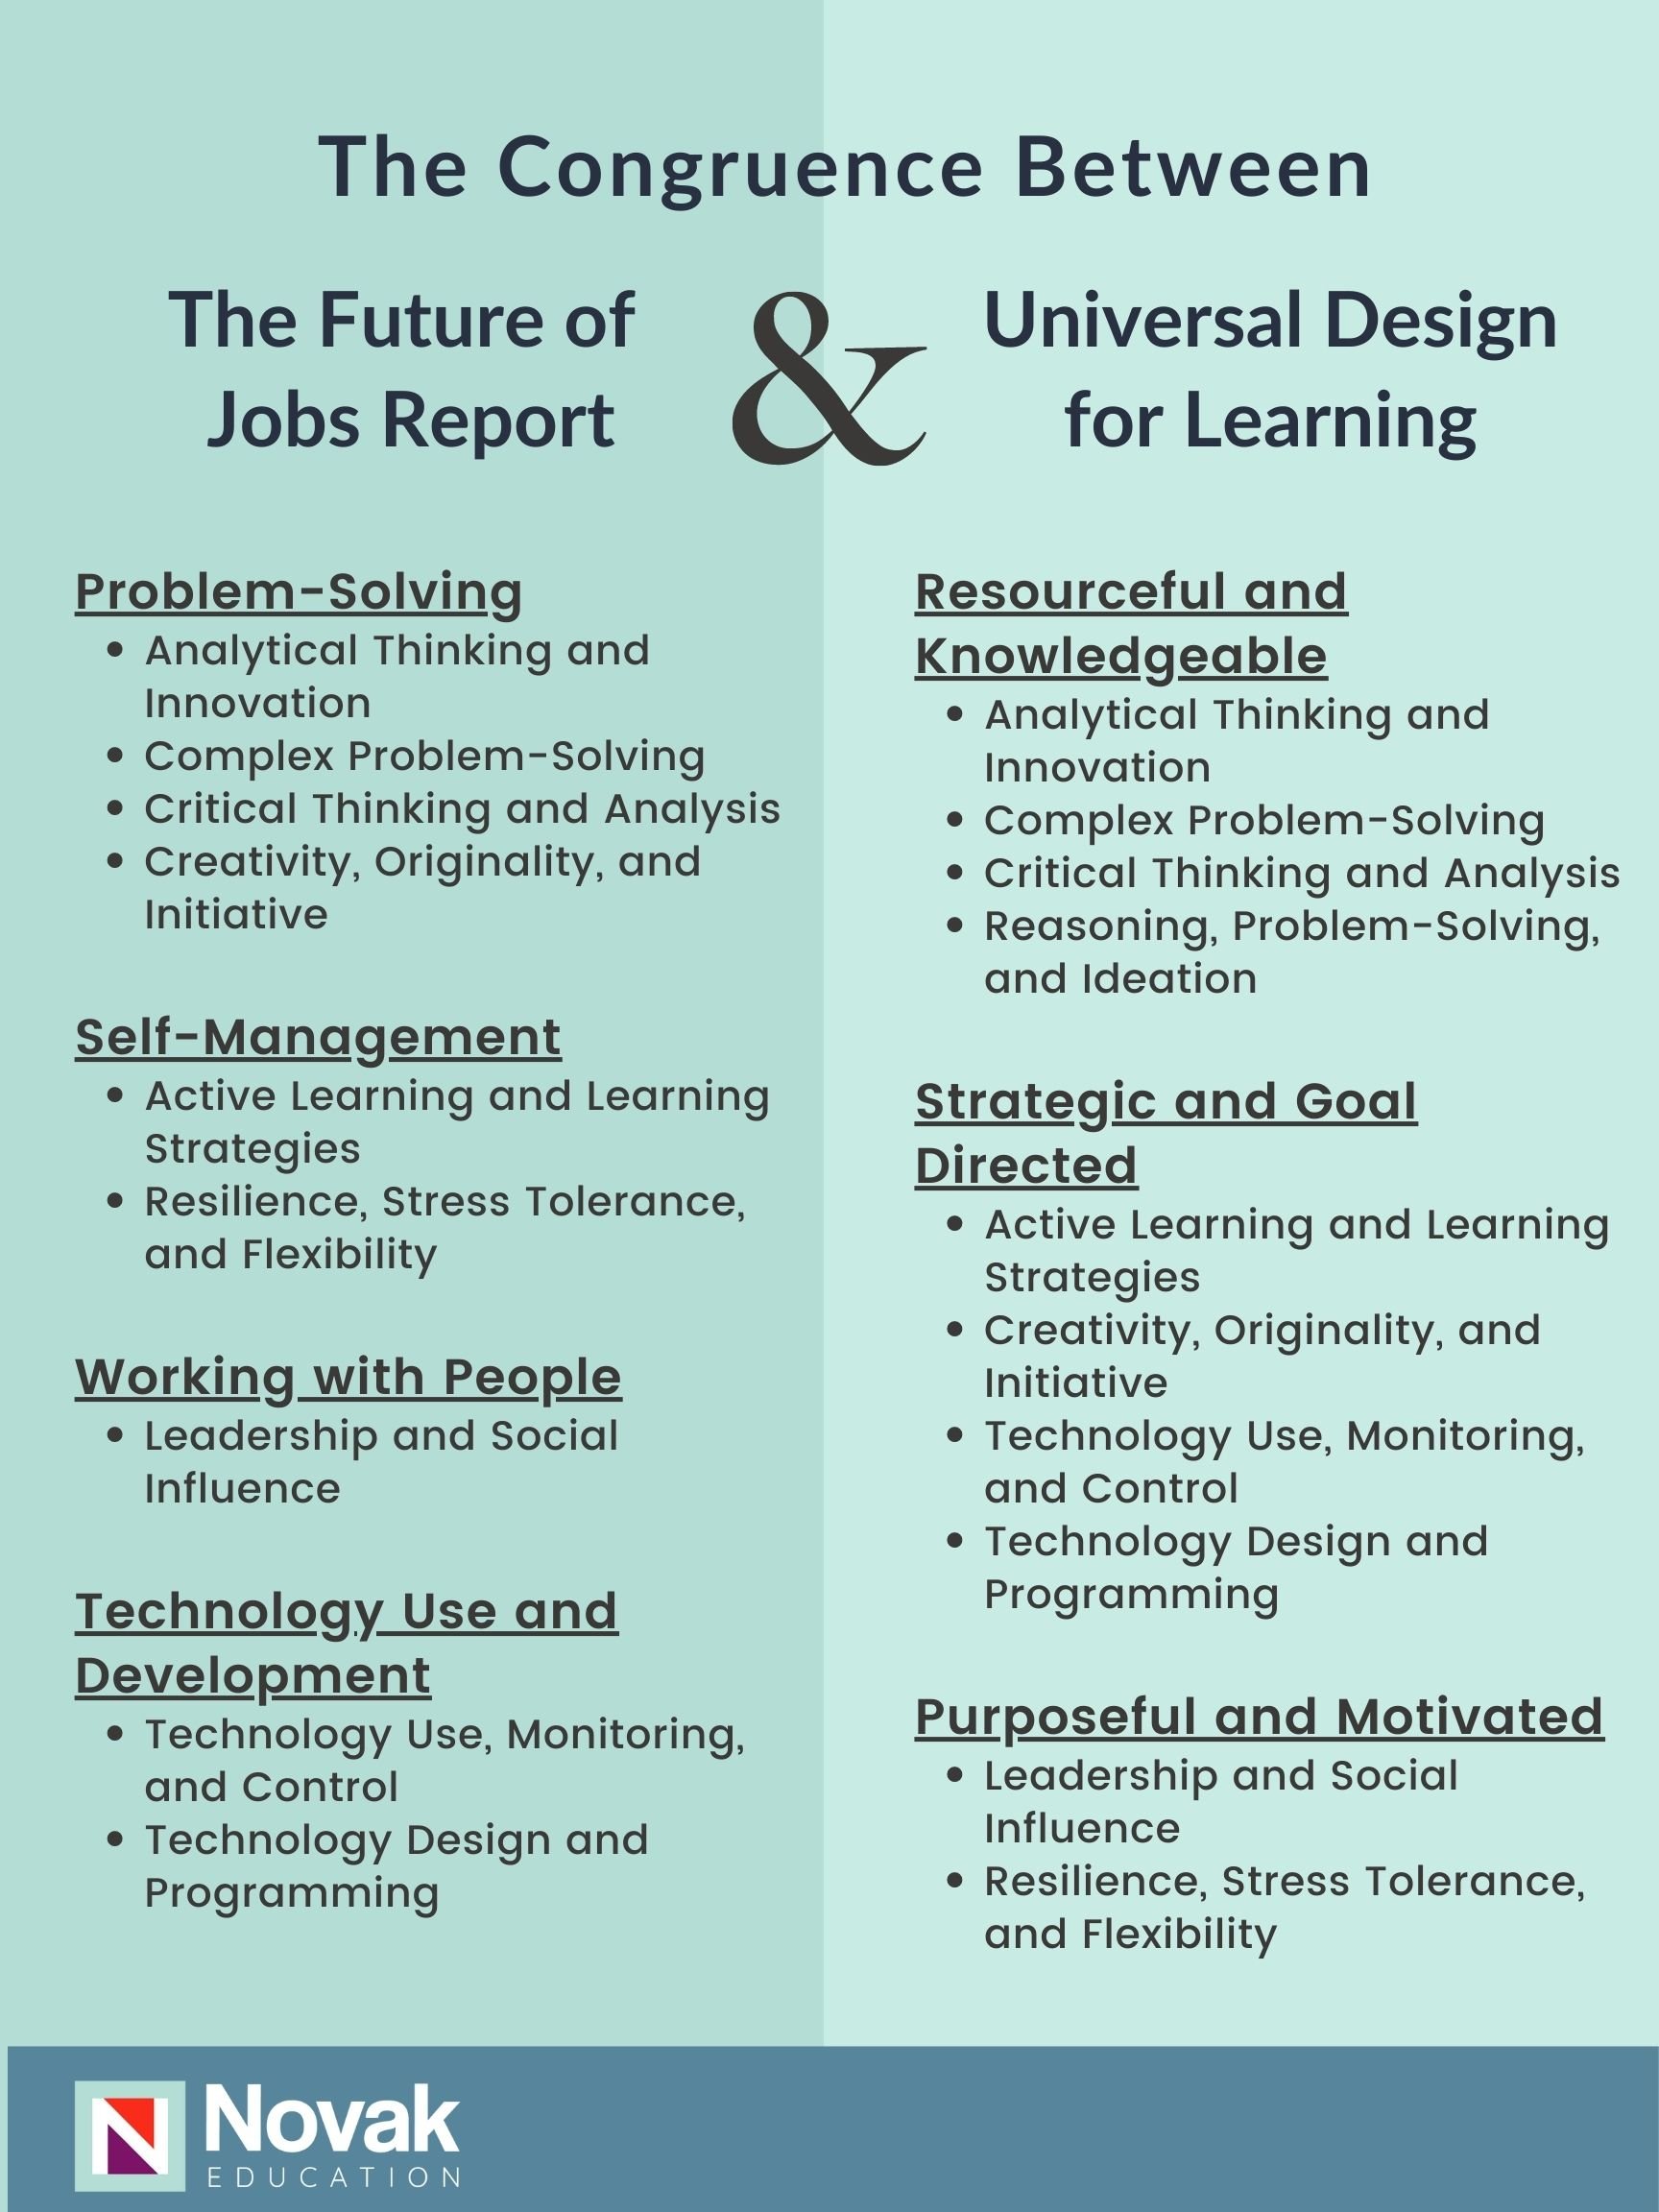 The congruence between the Future jobs report and UDL